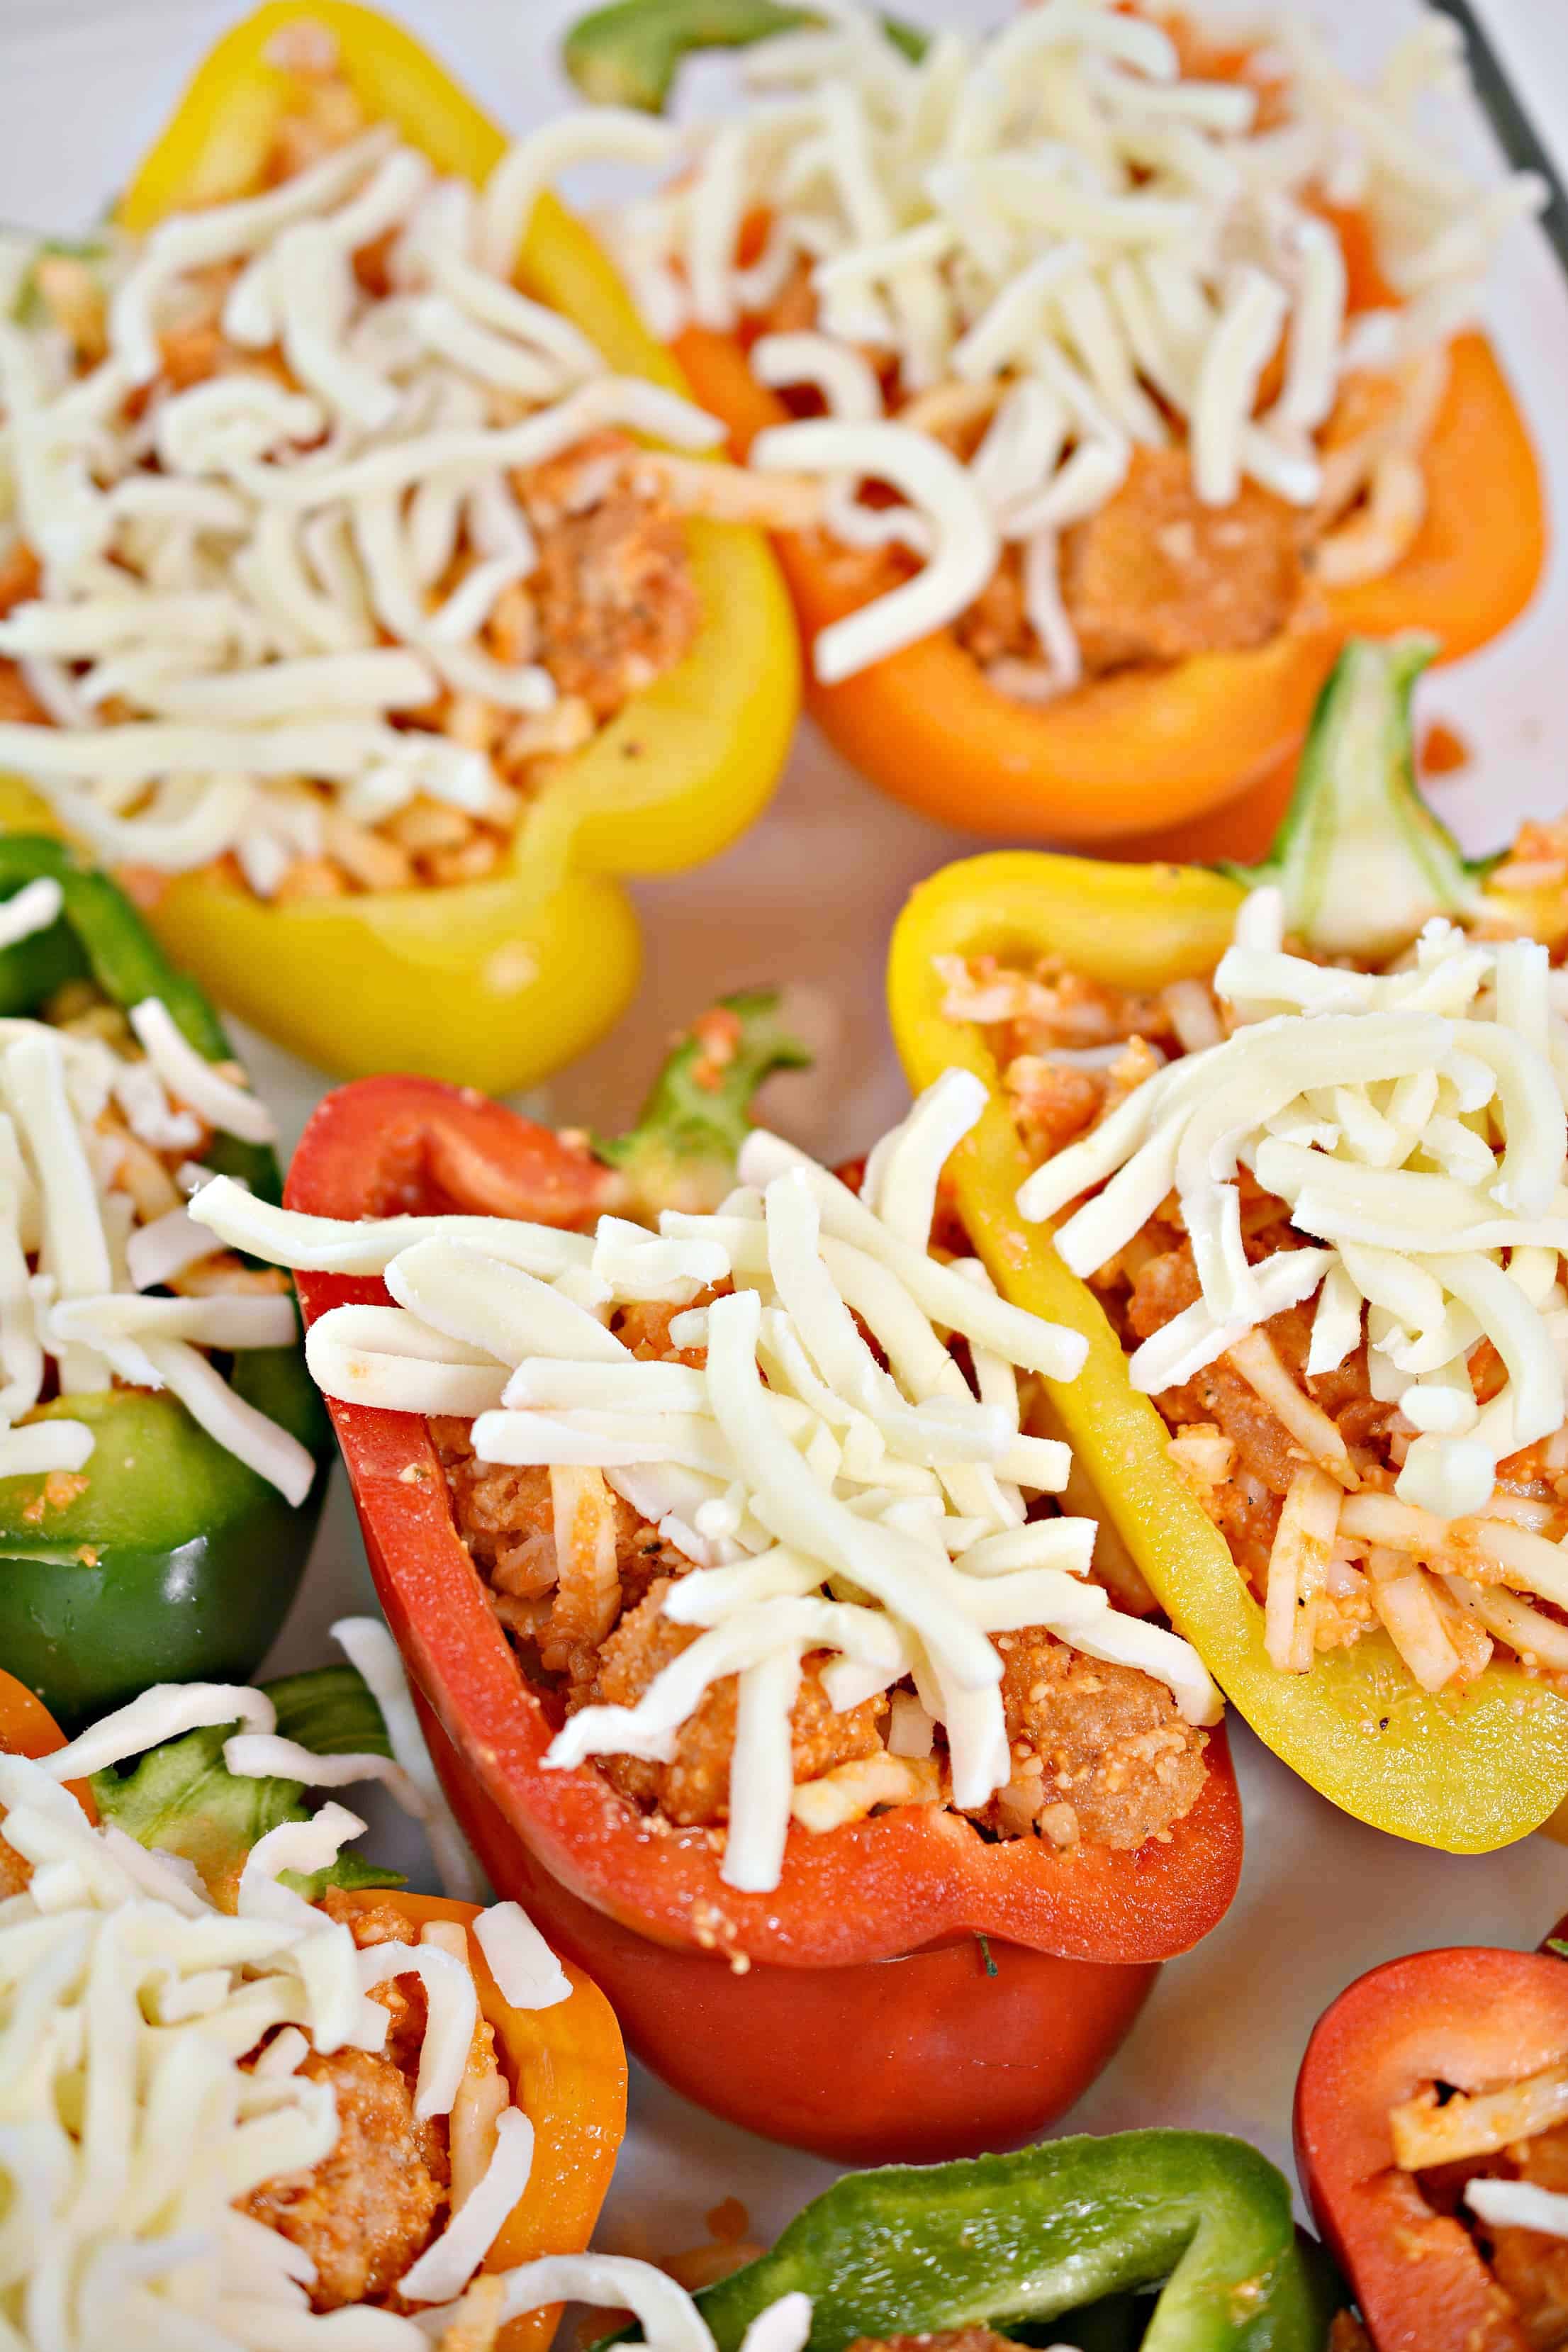 Add cheese to the top of bell peppers